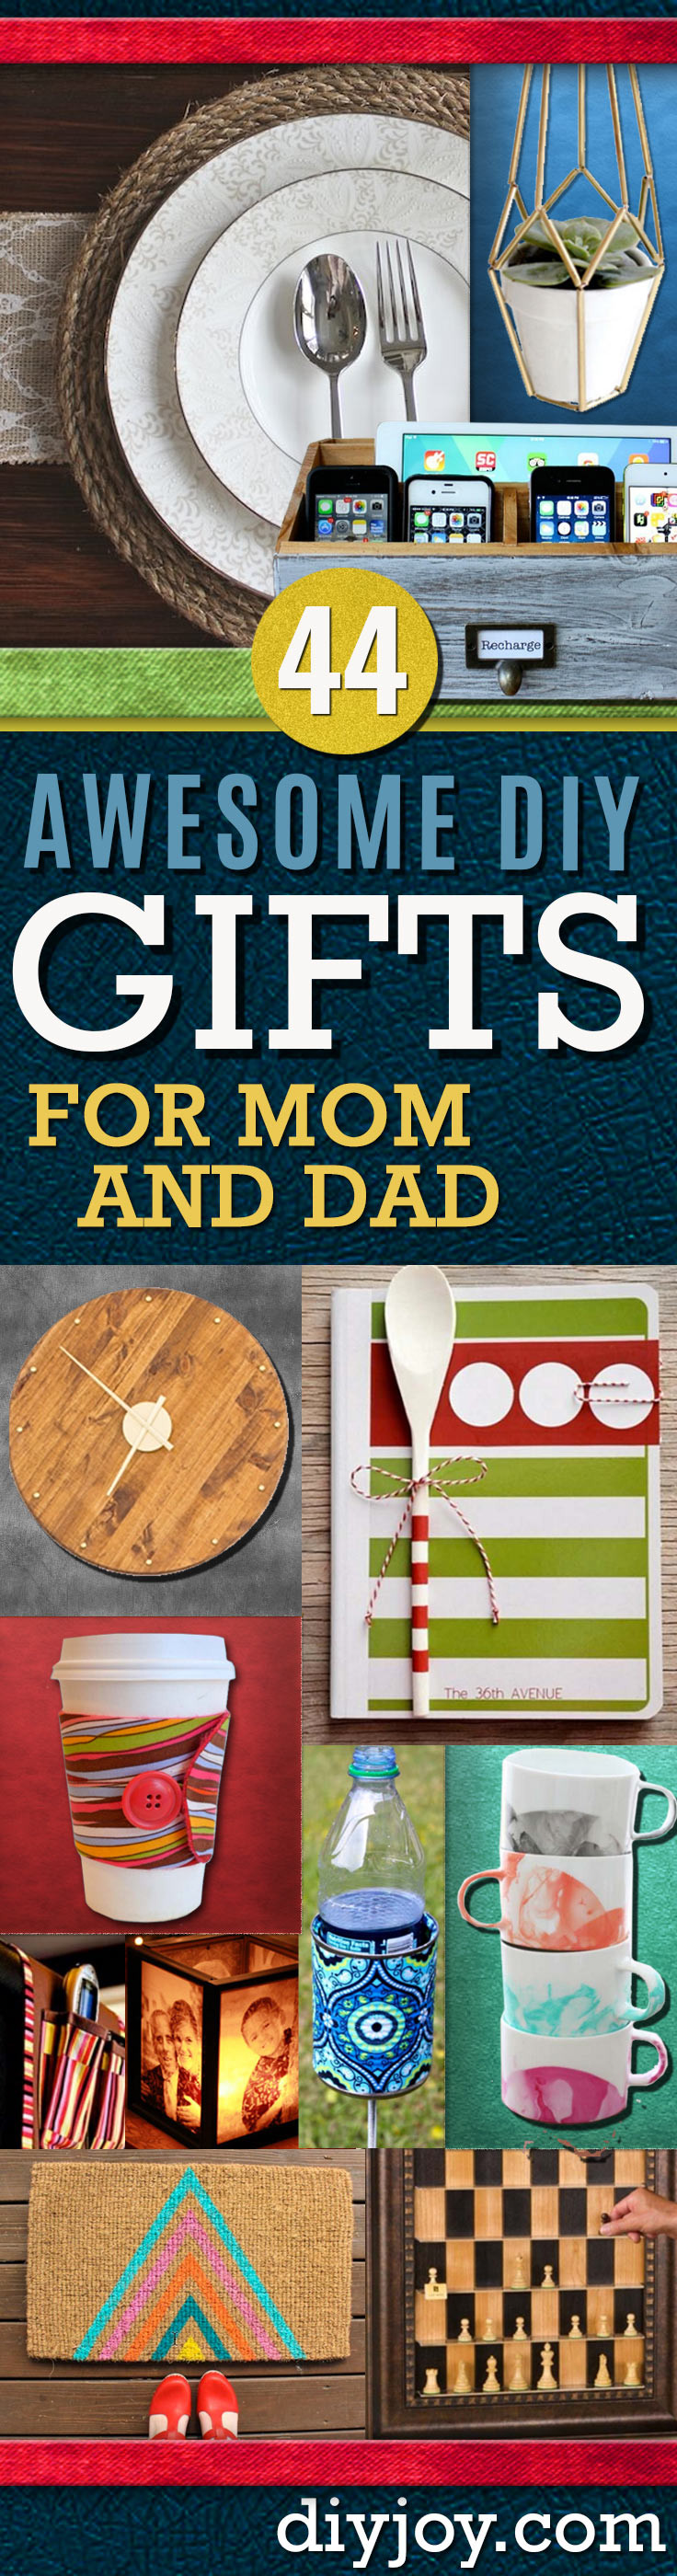 Good Dad Christmas Gift Ideas
 Awesome DIY Gift Ideas Mom and Dad Will Love